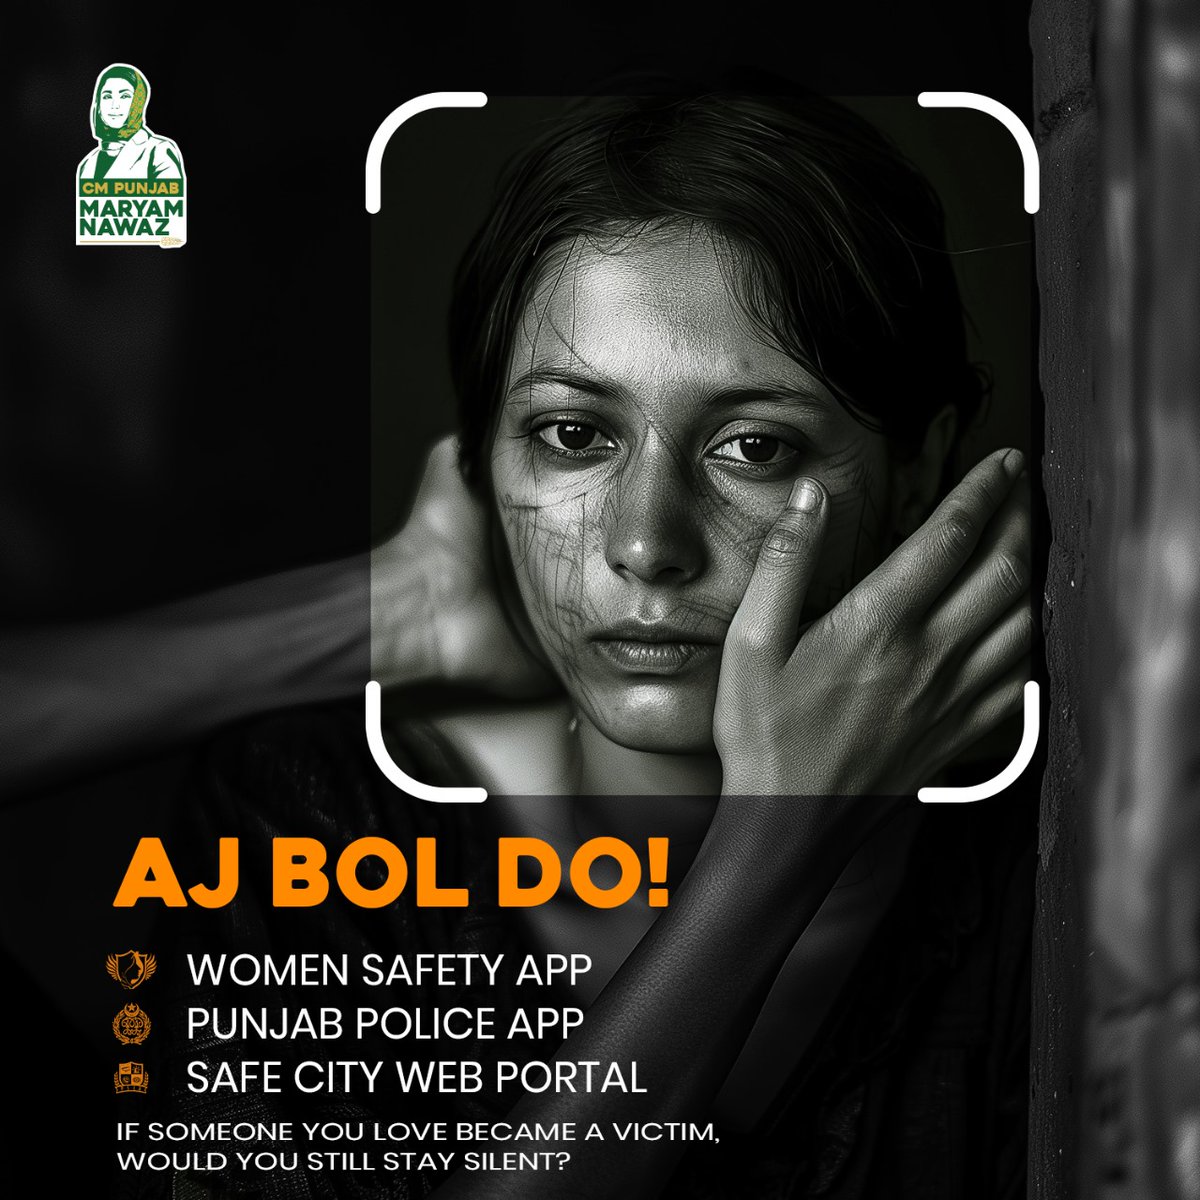 Excited to announce the launch of AJ BOL DO, a new app by the Punjab govt designed to ensure the safety of women and girls. With just a tap, you can alert authorities and get immediate assistance. Stay safe and empowered with this innovative tool! #WomensSafety #AJBOLDO